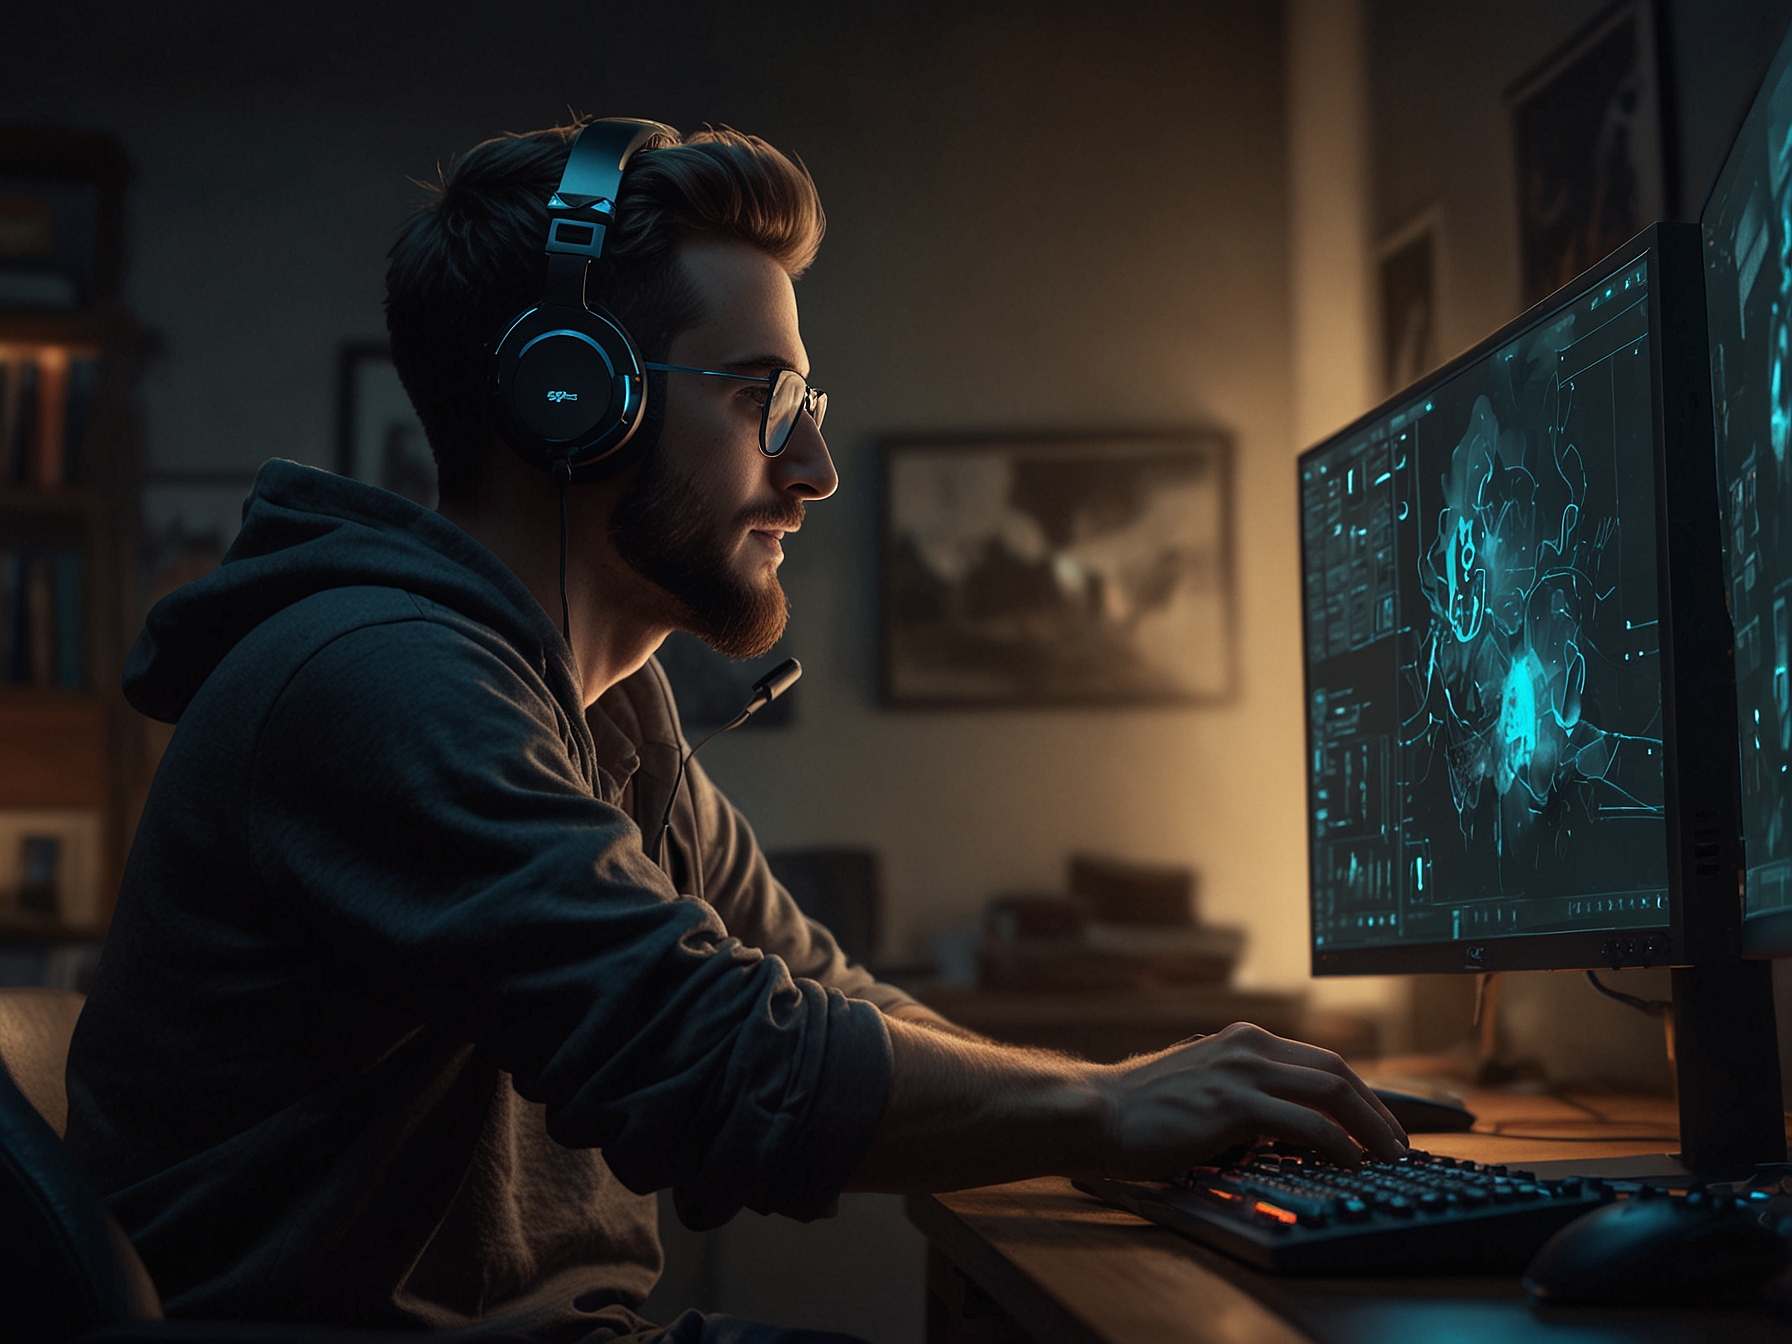 A gamer enjoying smooth, fluid gameplay on a high-resolution monitor with a 144Hz refresh rate, showcasing the benefits of monitor upgrades in enhancing visual performance.